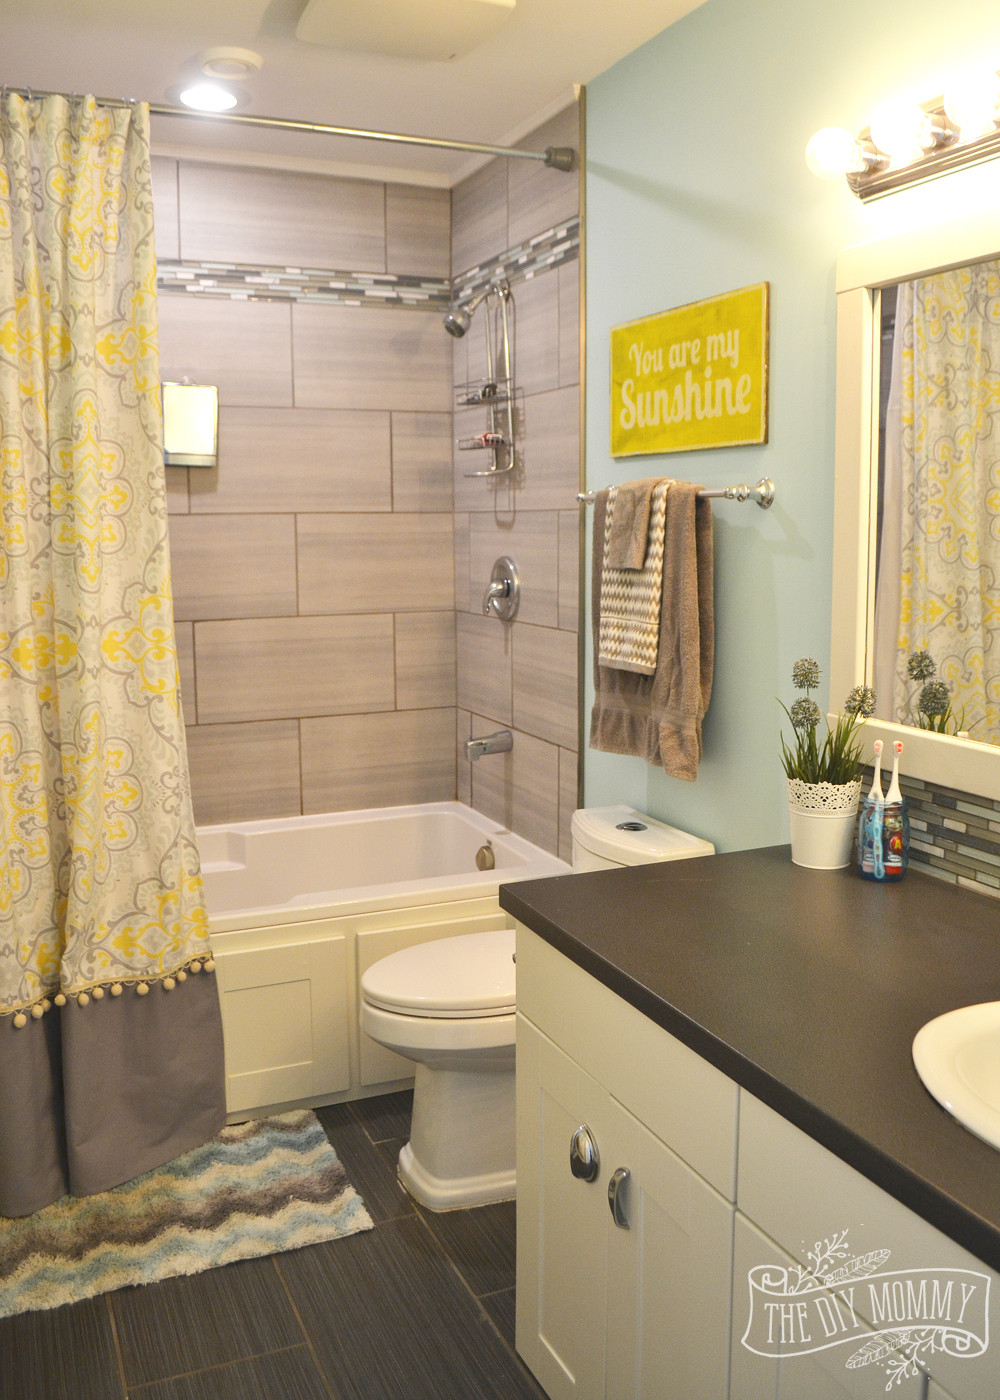 Bathroom Sets For Kids
 Kids Bathroom Reveal and some great tips for post reno